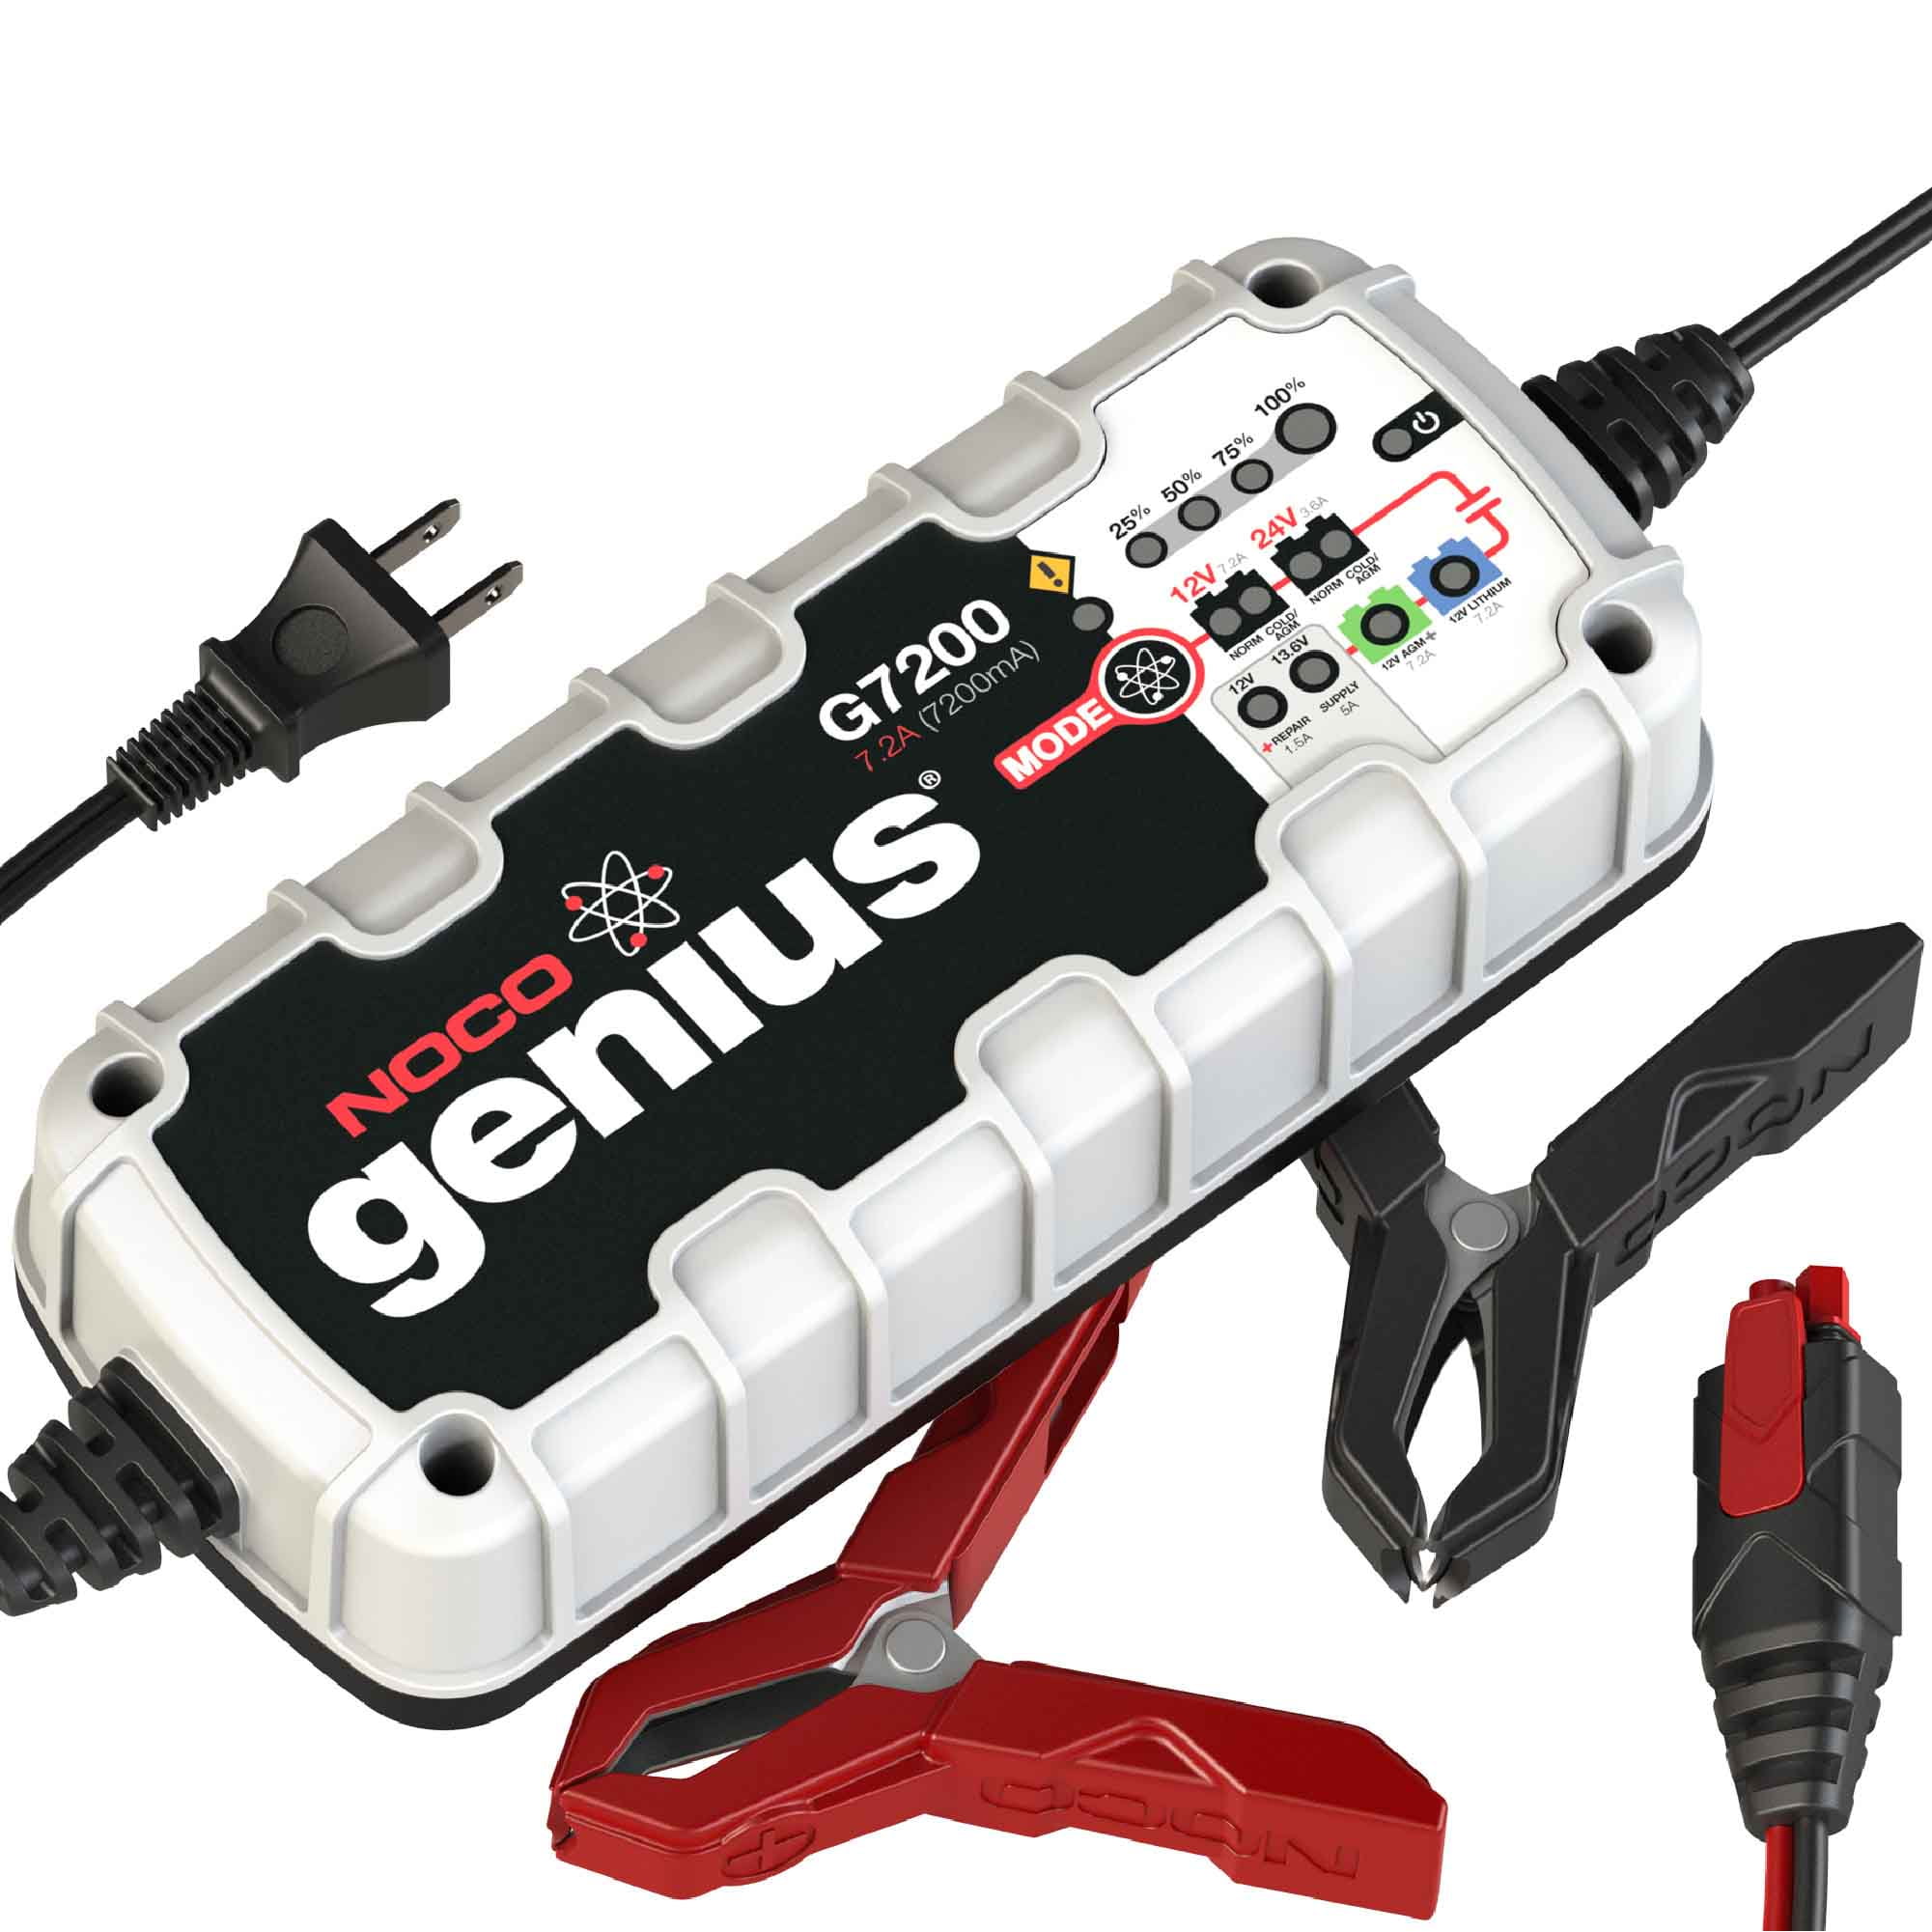 NOCO Genius G7200 12V/24V 7.2 Amp Battery Charger and Maintainer 